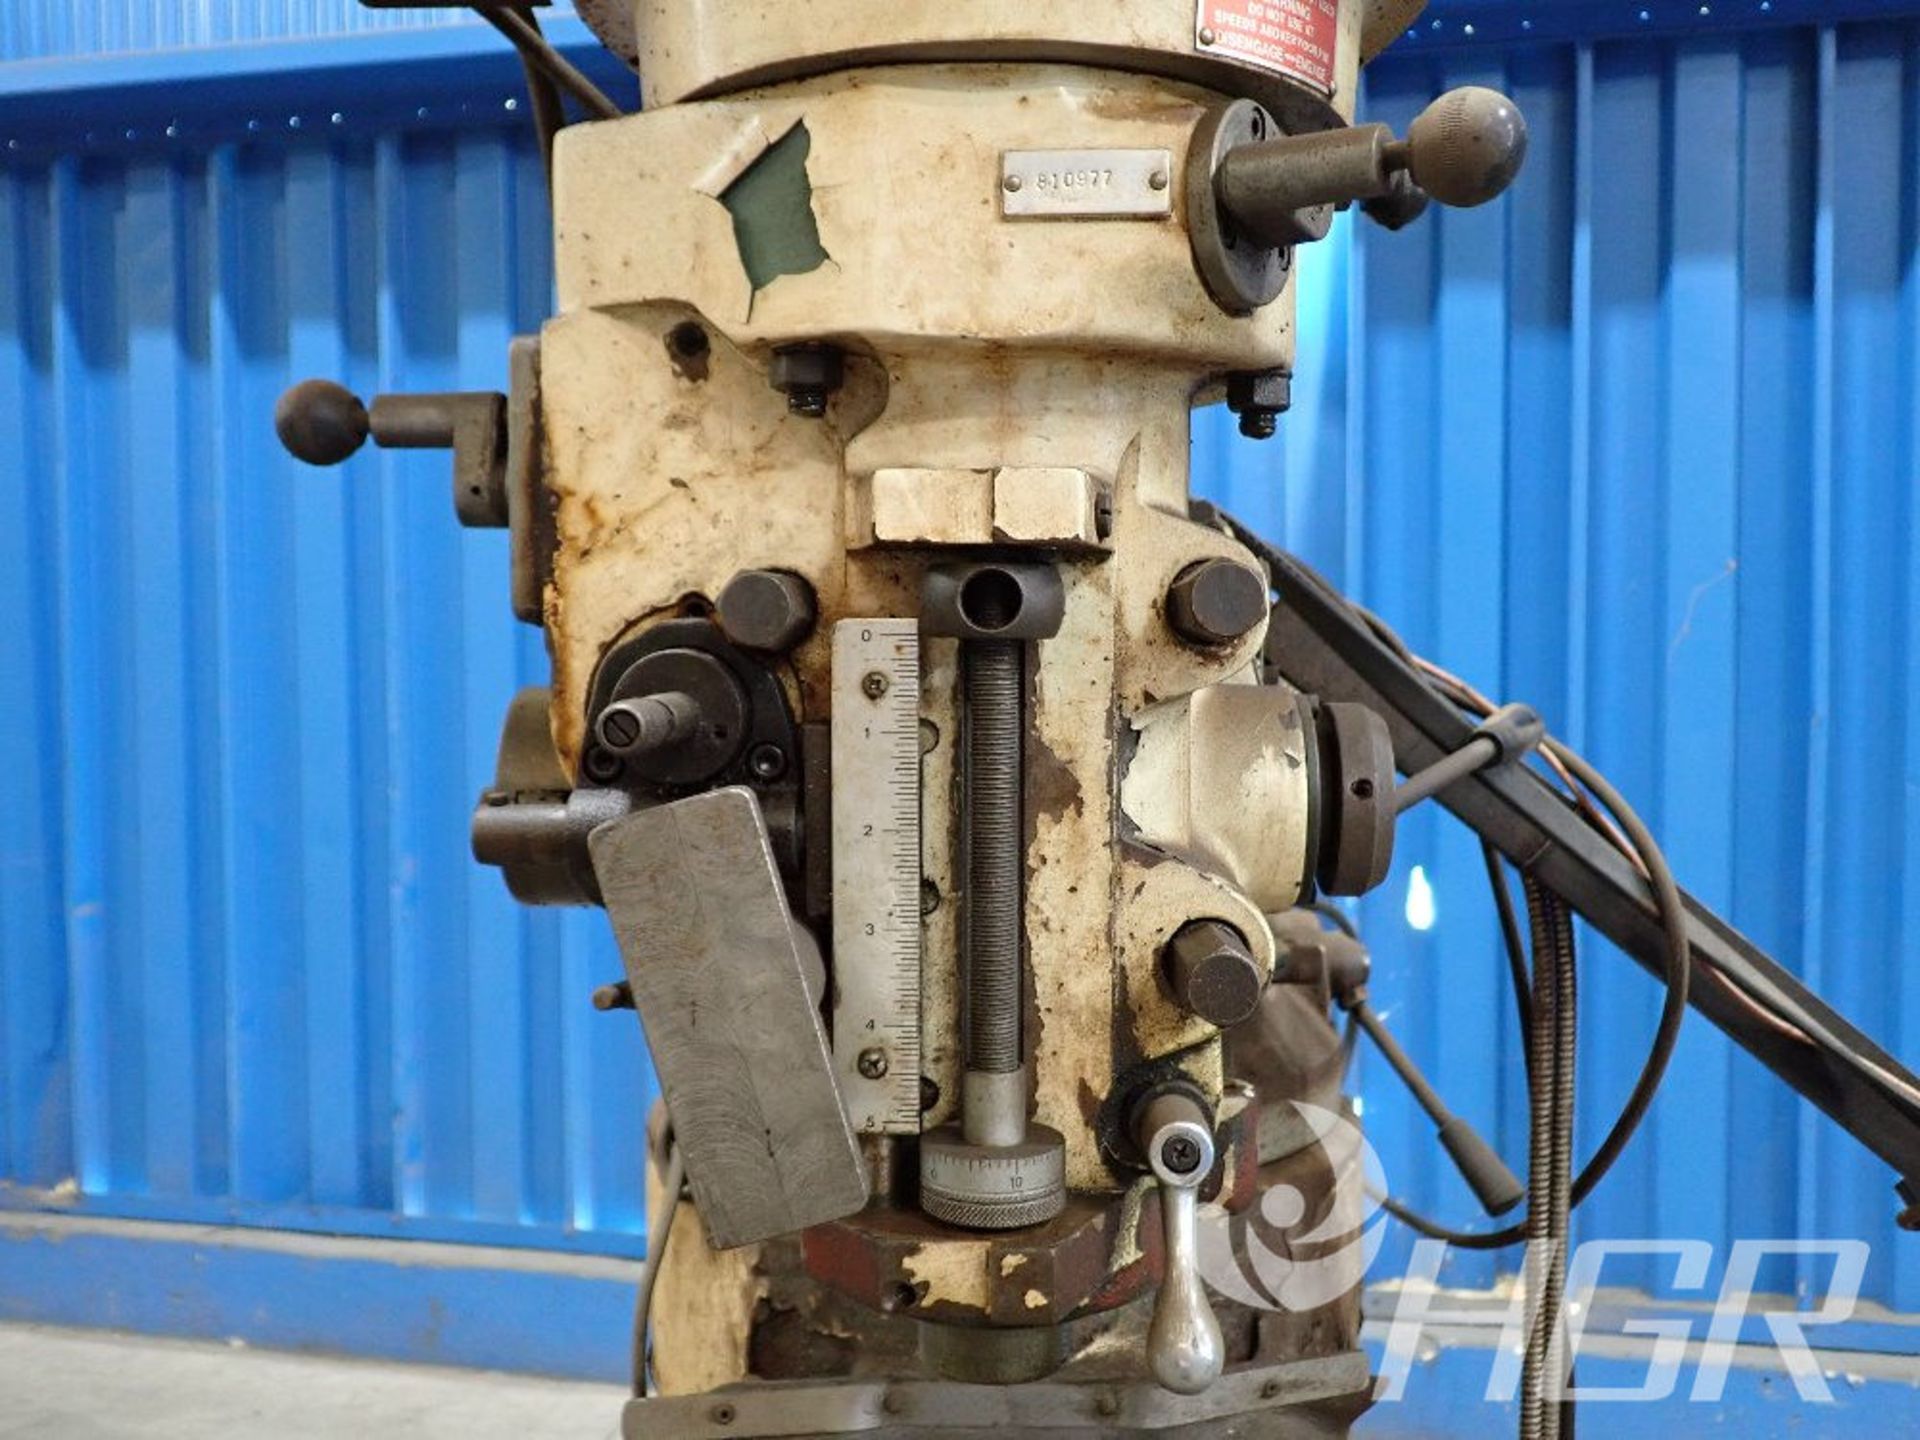 JET VIRTICAL MILL, Model JTM-1, Date: n/a; s/n n/a, Approx. Capacity: 42X9, Power: n/a, Details: - Image 7 of 15